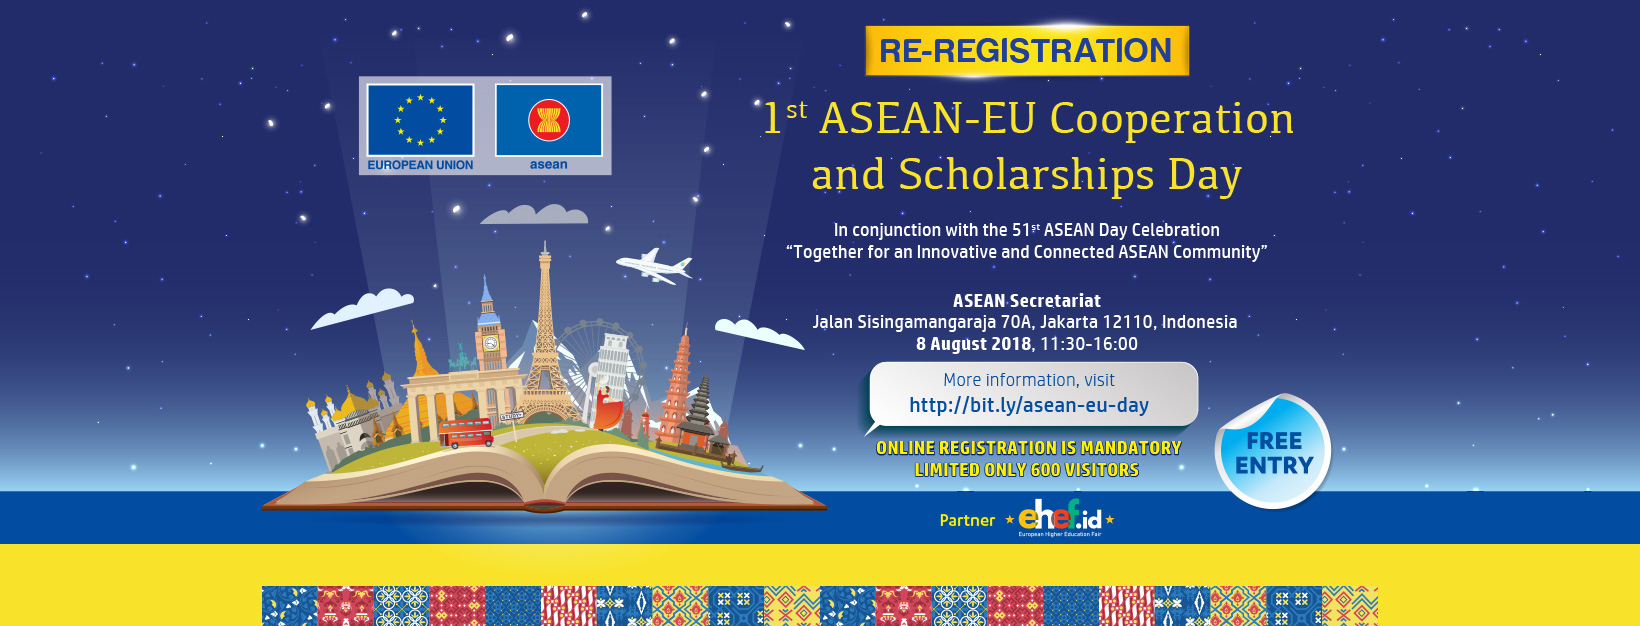 [UPDATE] ASEAN-EU Cooperation and Scholarships Day